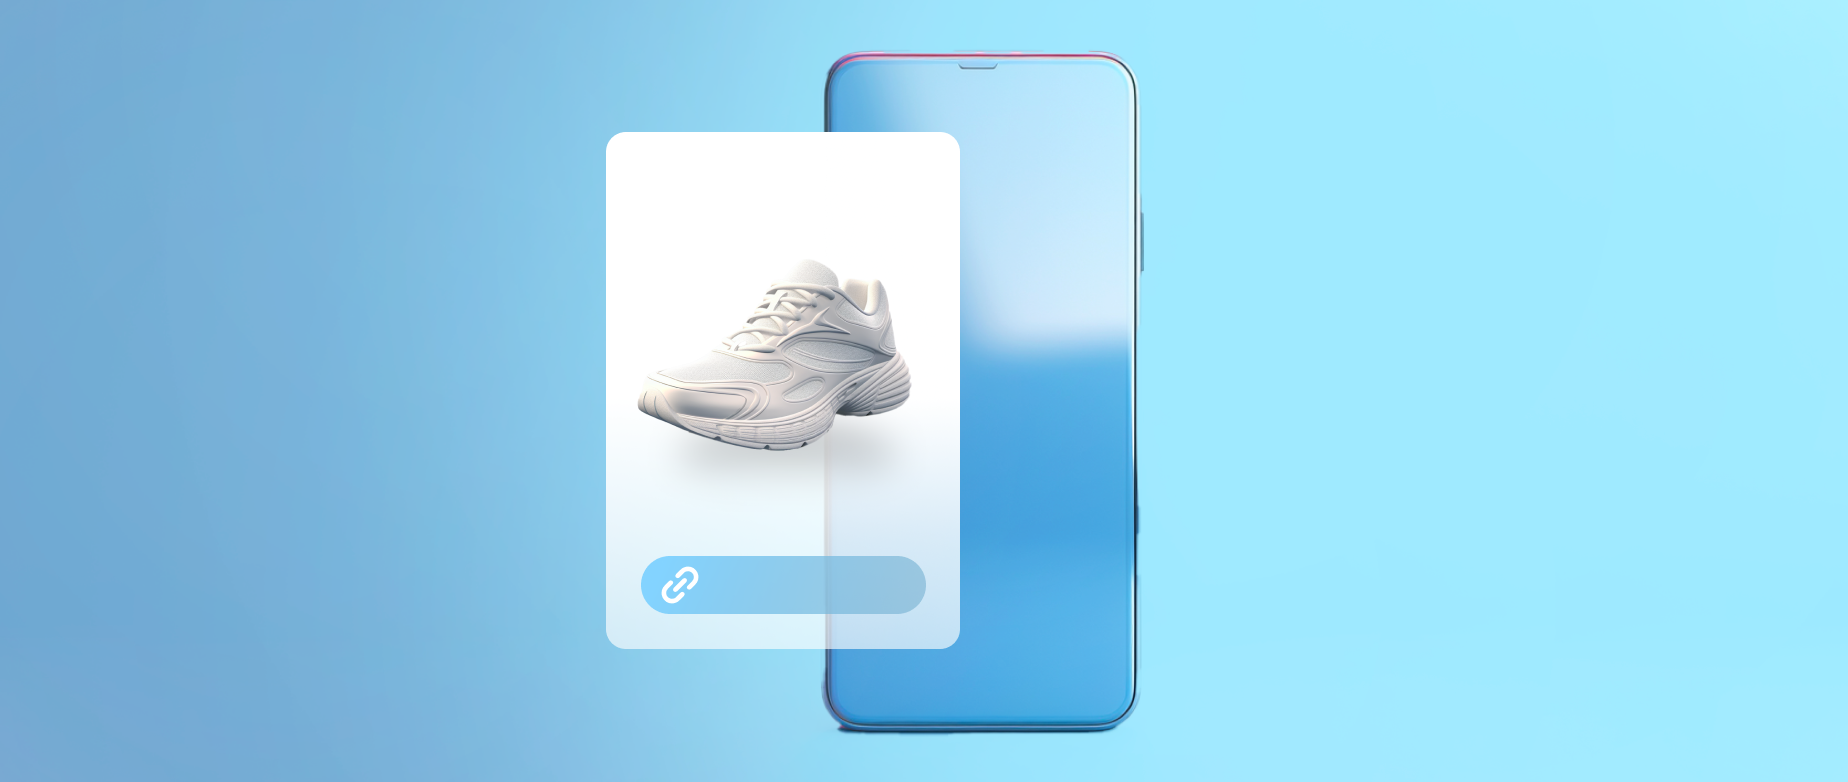 A iphone with a photo of a sneaker with link attached.